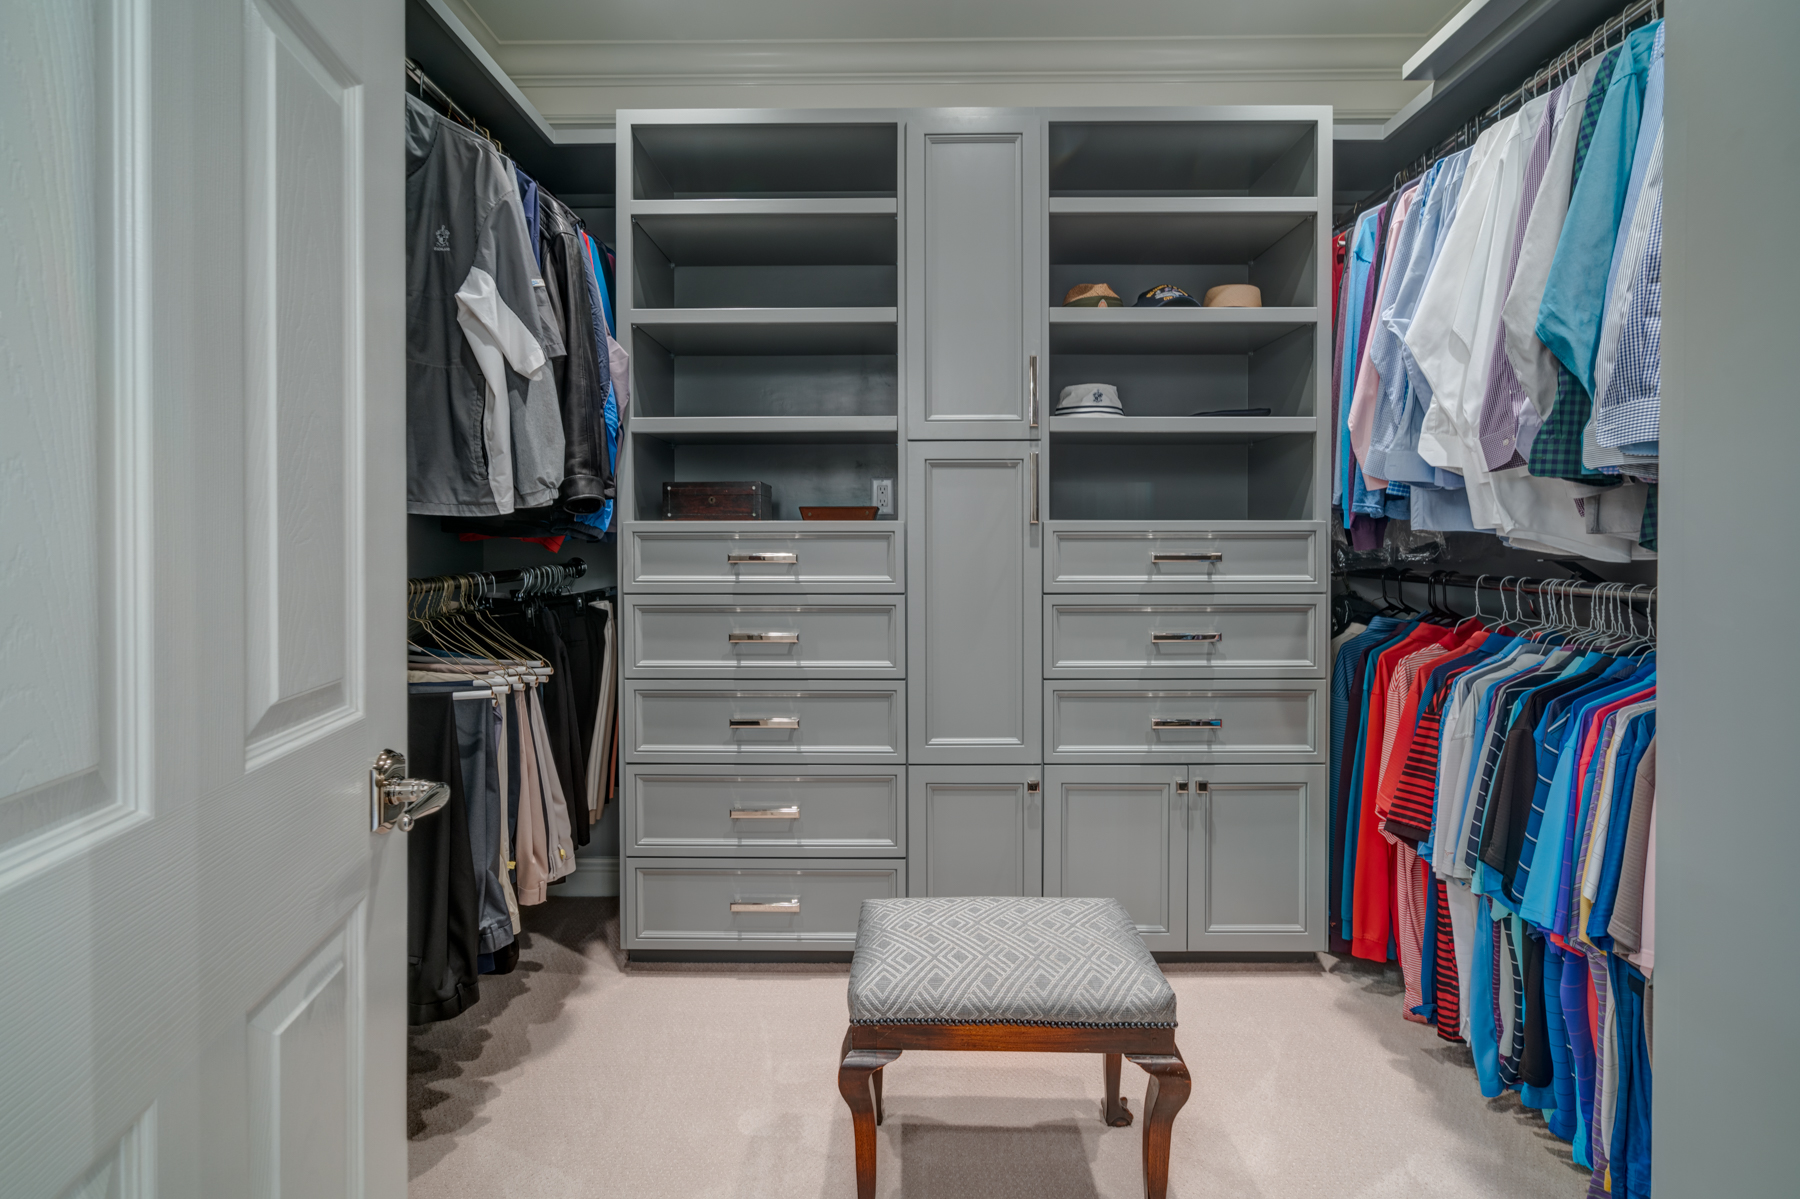 Custom cabinetry in the master closet